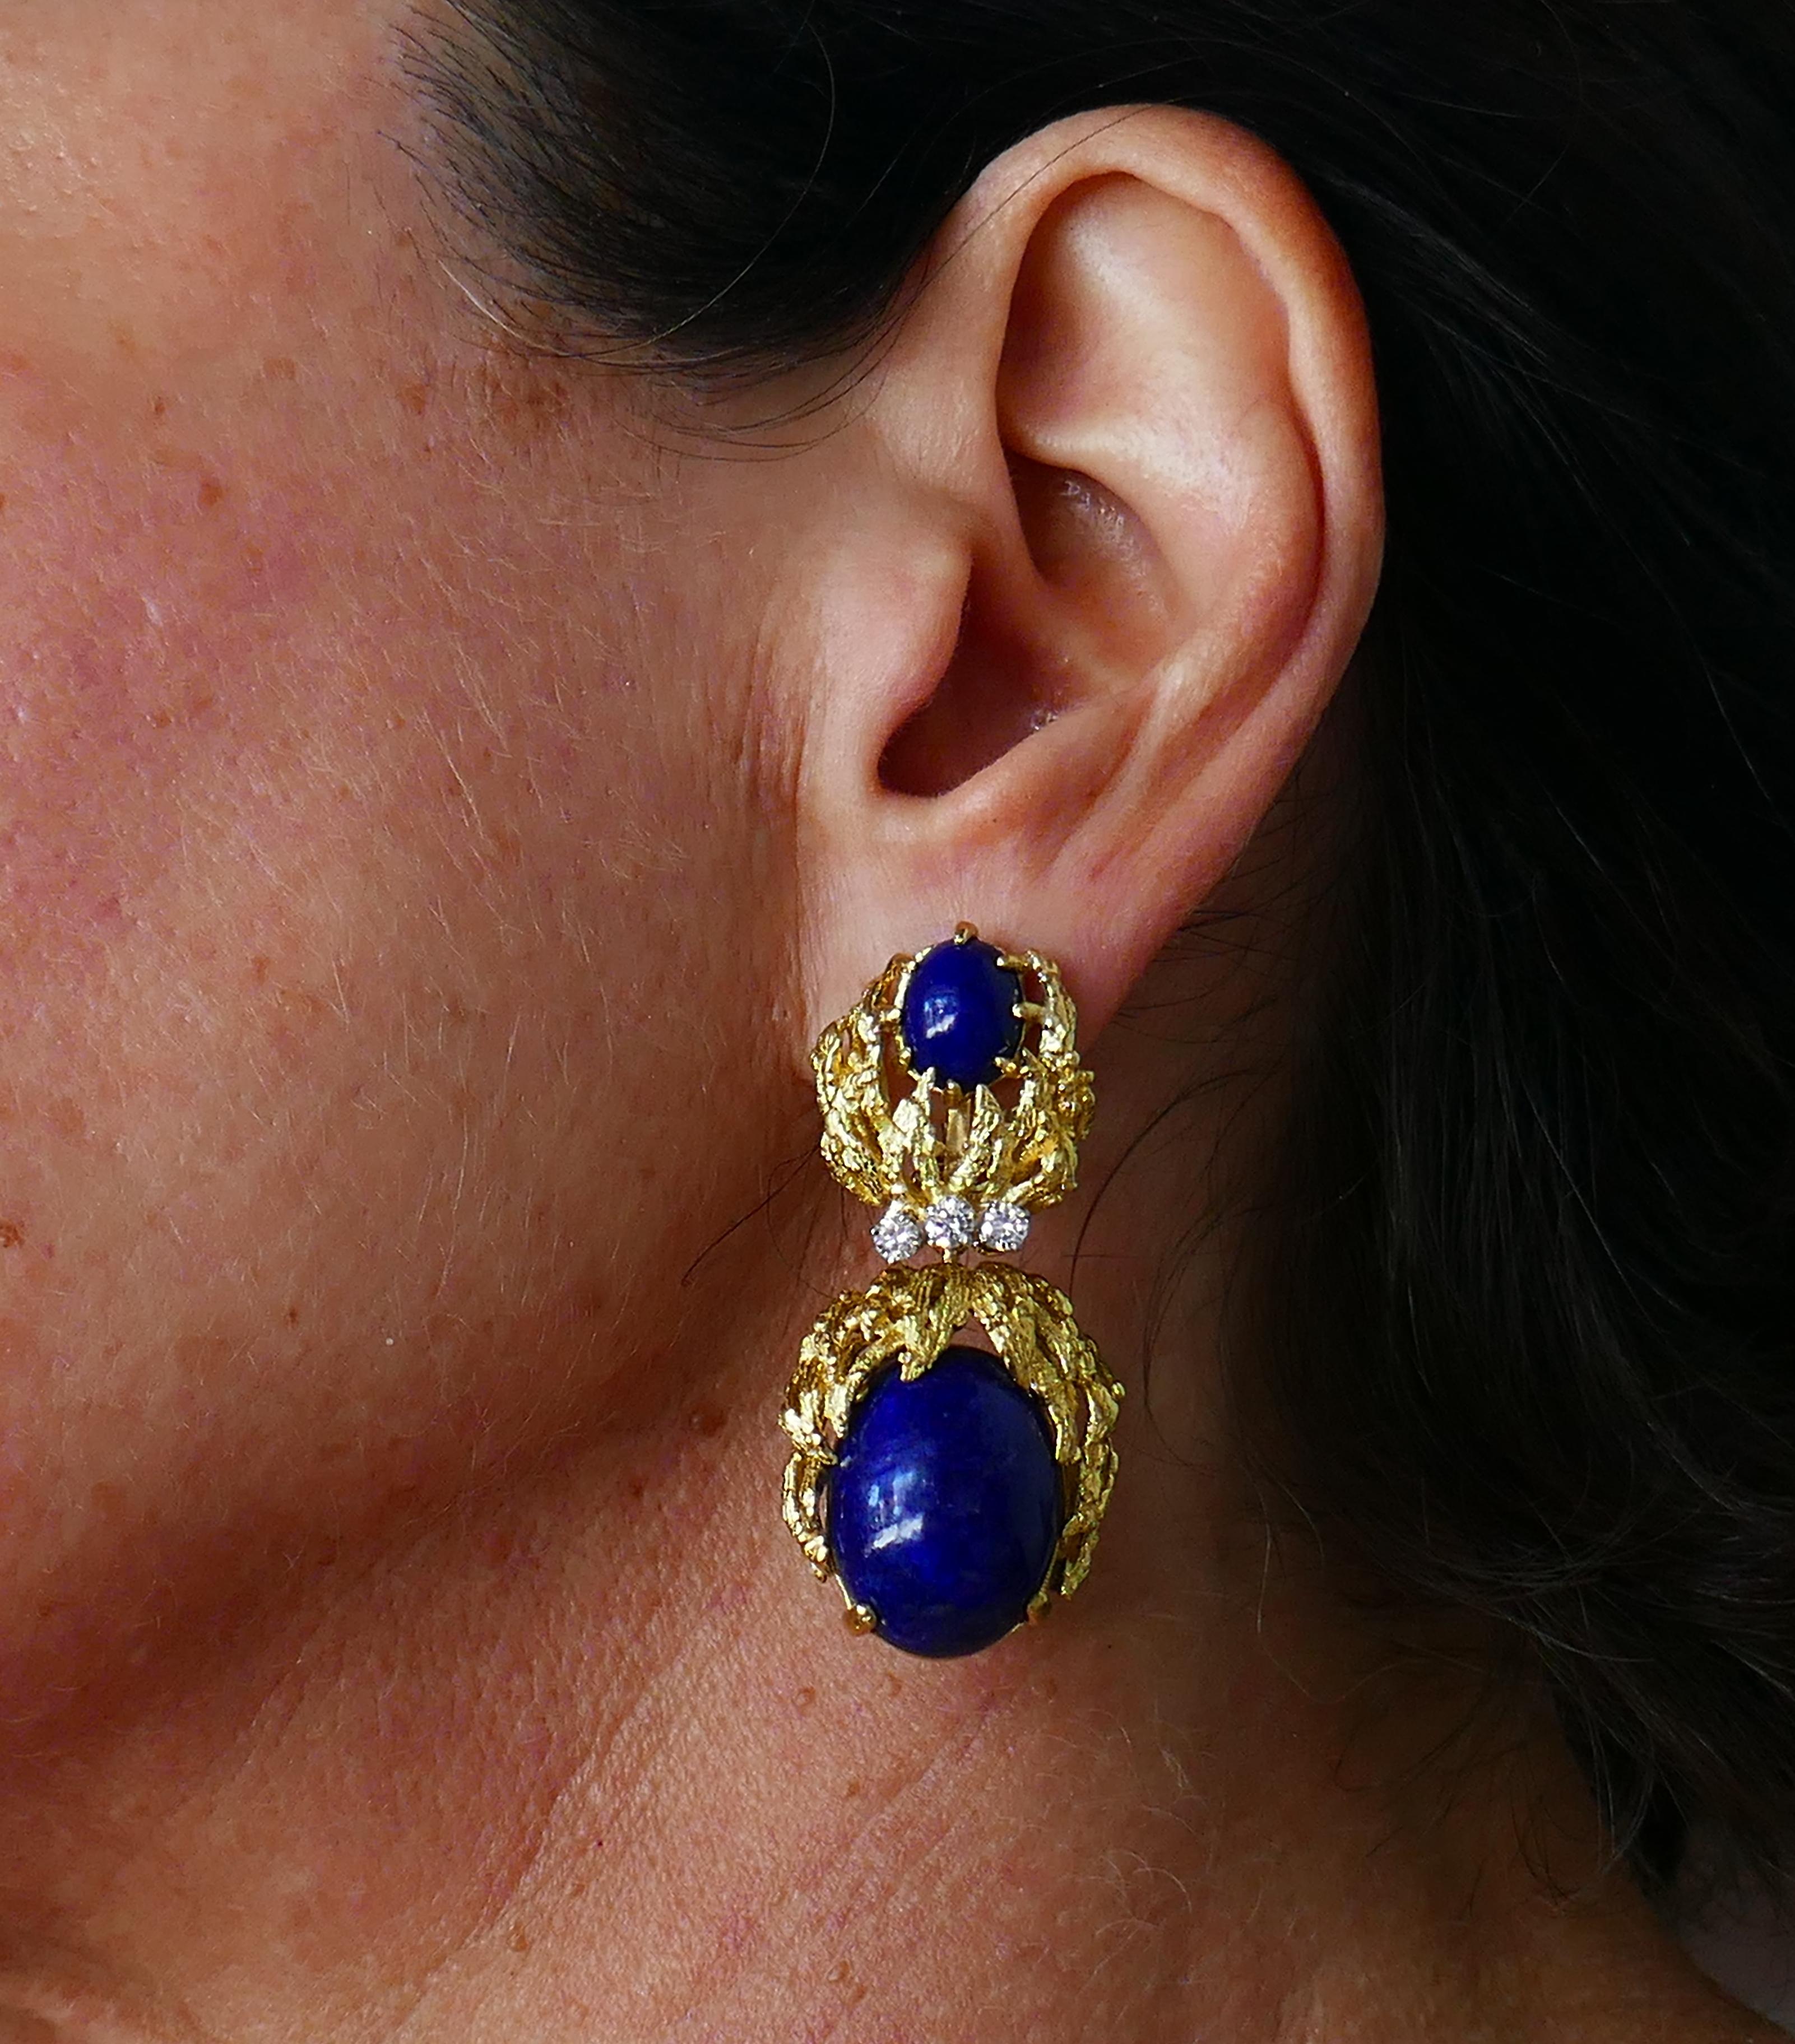 Colorful and prominent earrings created by Ruth Satsky in the 1950s. They feature oval cabochon lapis lazuli set in 18 karat yellow gold and accentuated with three diamonds (G-H color, VS clarity, total weight approximately 0.60 carat). 
The